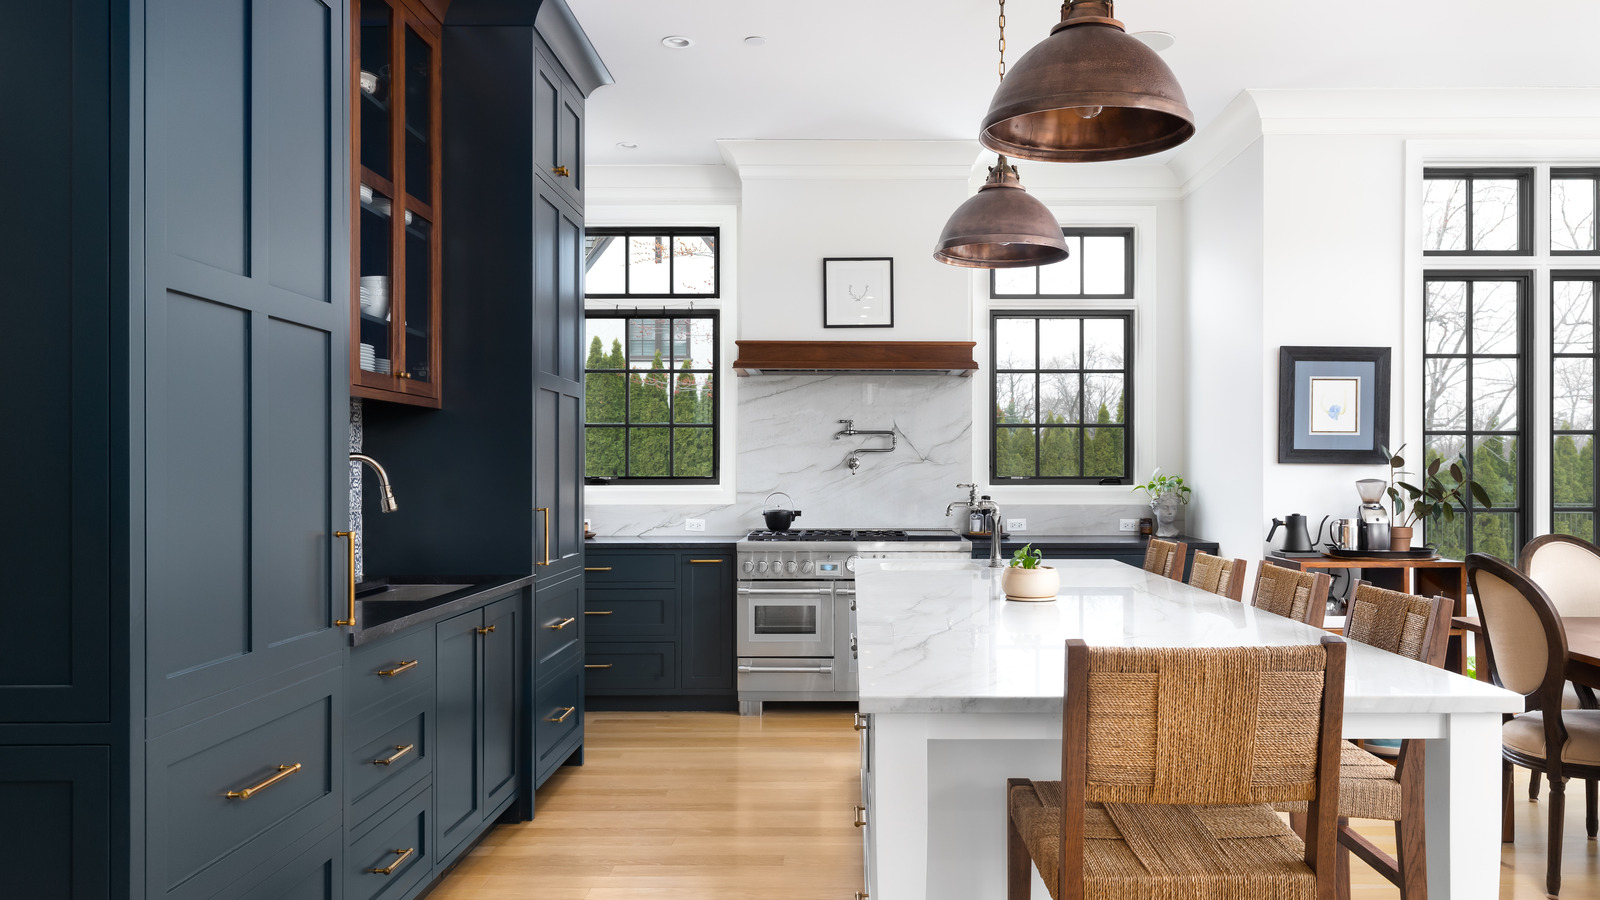 https://www.housedigest.com/img/gallery/how-much-you-should-expect-to-spend-on-a-kitchen-remodel/l-intro-1651842836.jpg